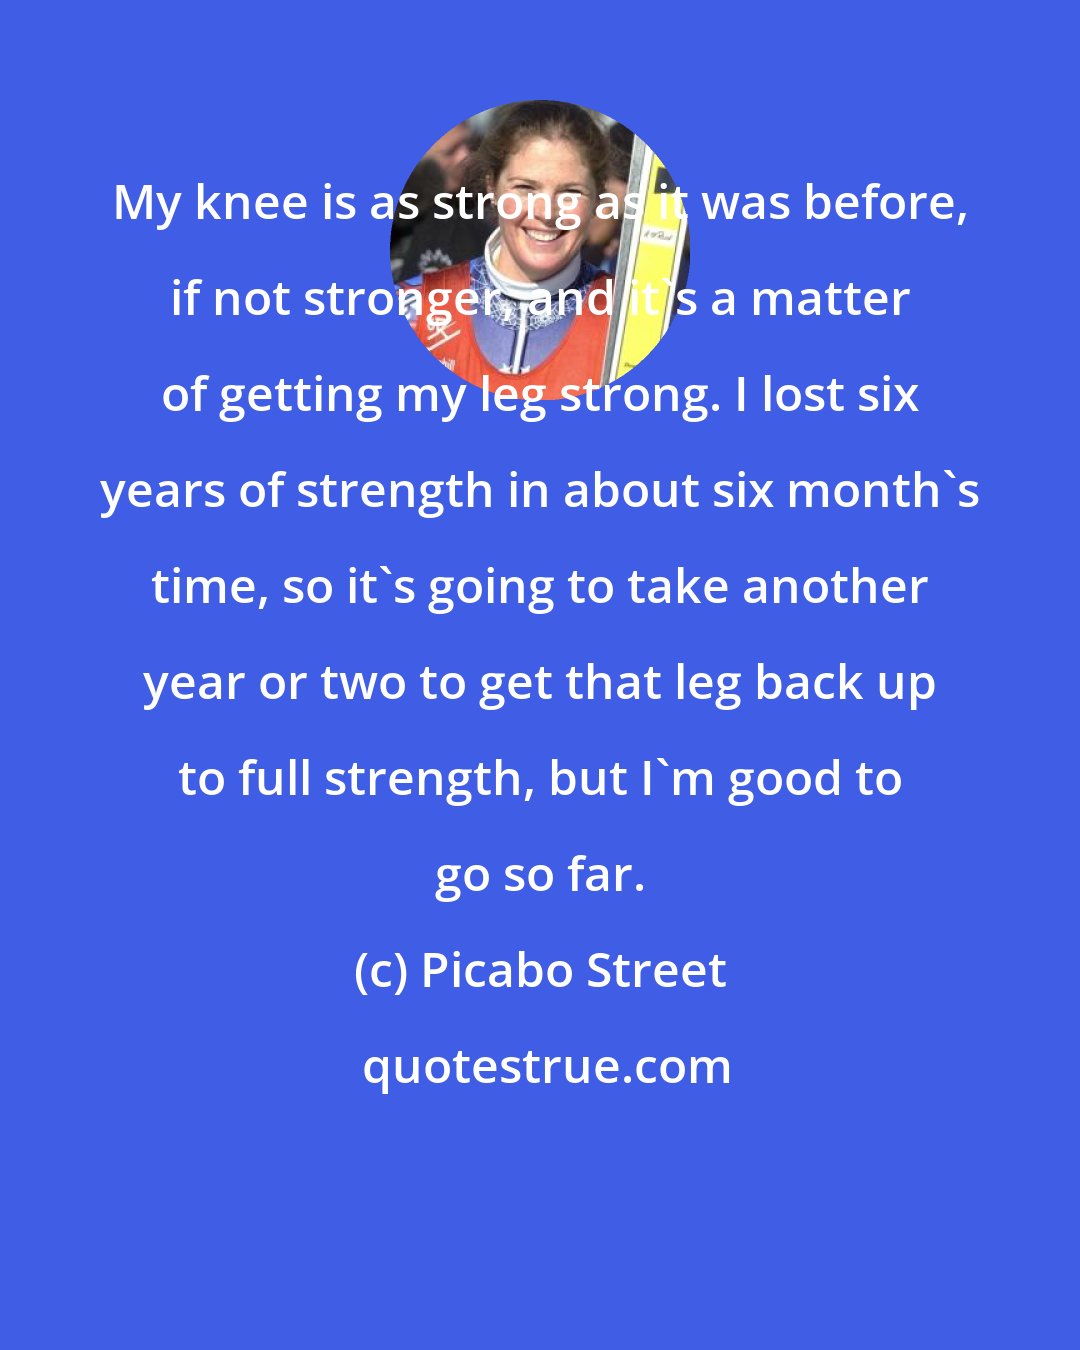 Picabo Street: My knee is as strong as it was before, if not stronger, and it's a matter of getting my leg strong. I lost six years of strength in about six month's time, so it's going to take another year or two to get that leg back up to full strength, but I'm good to go so far.